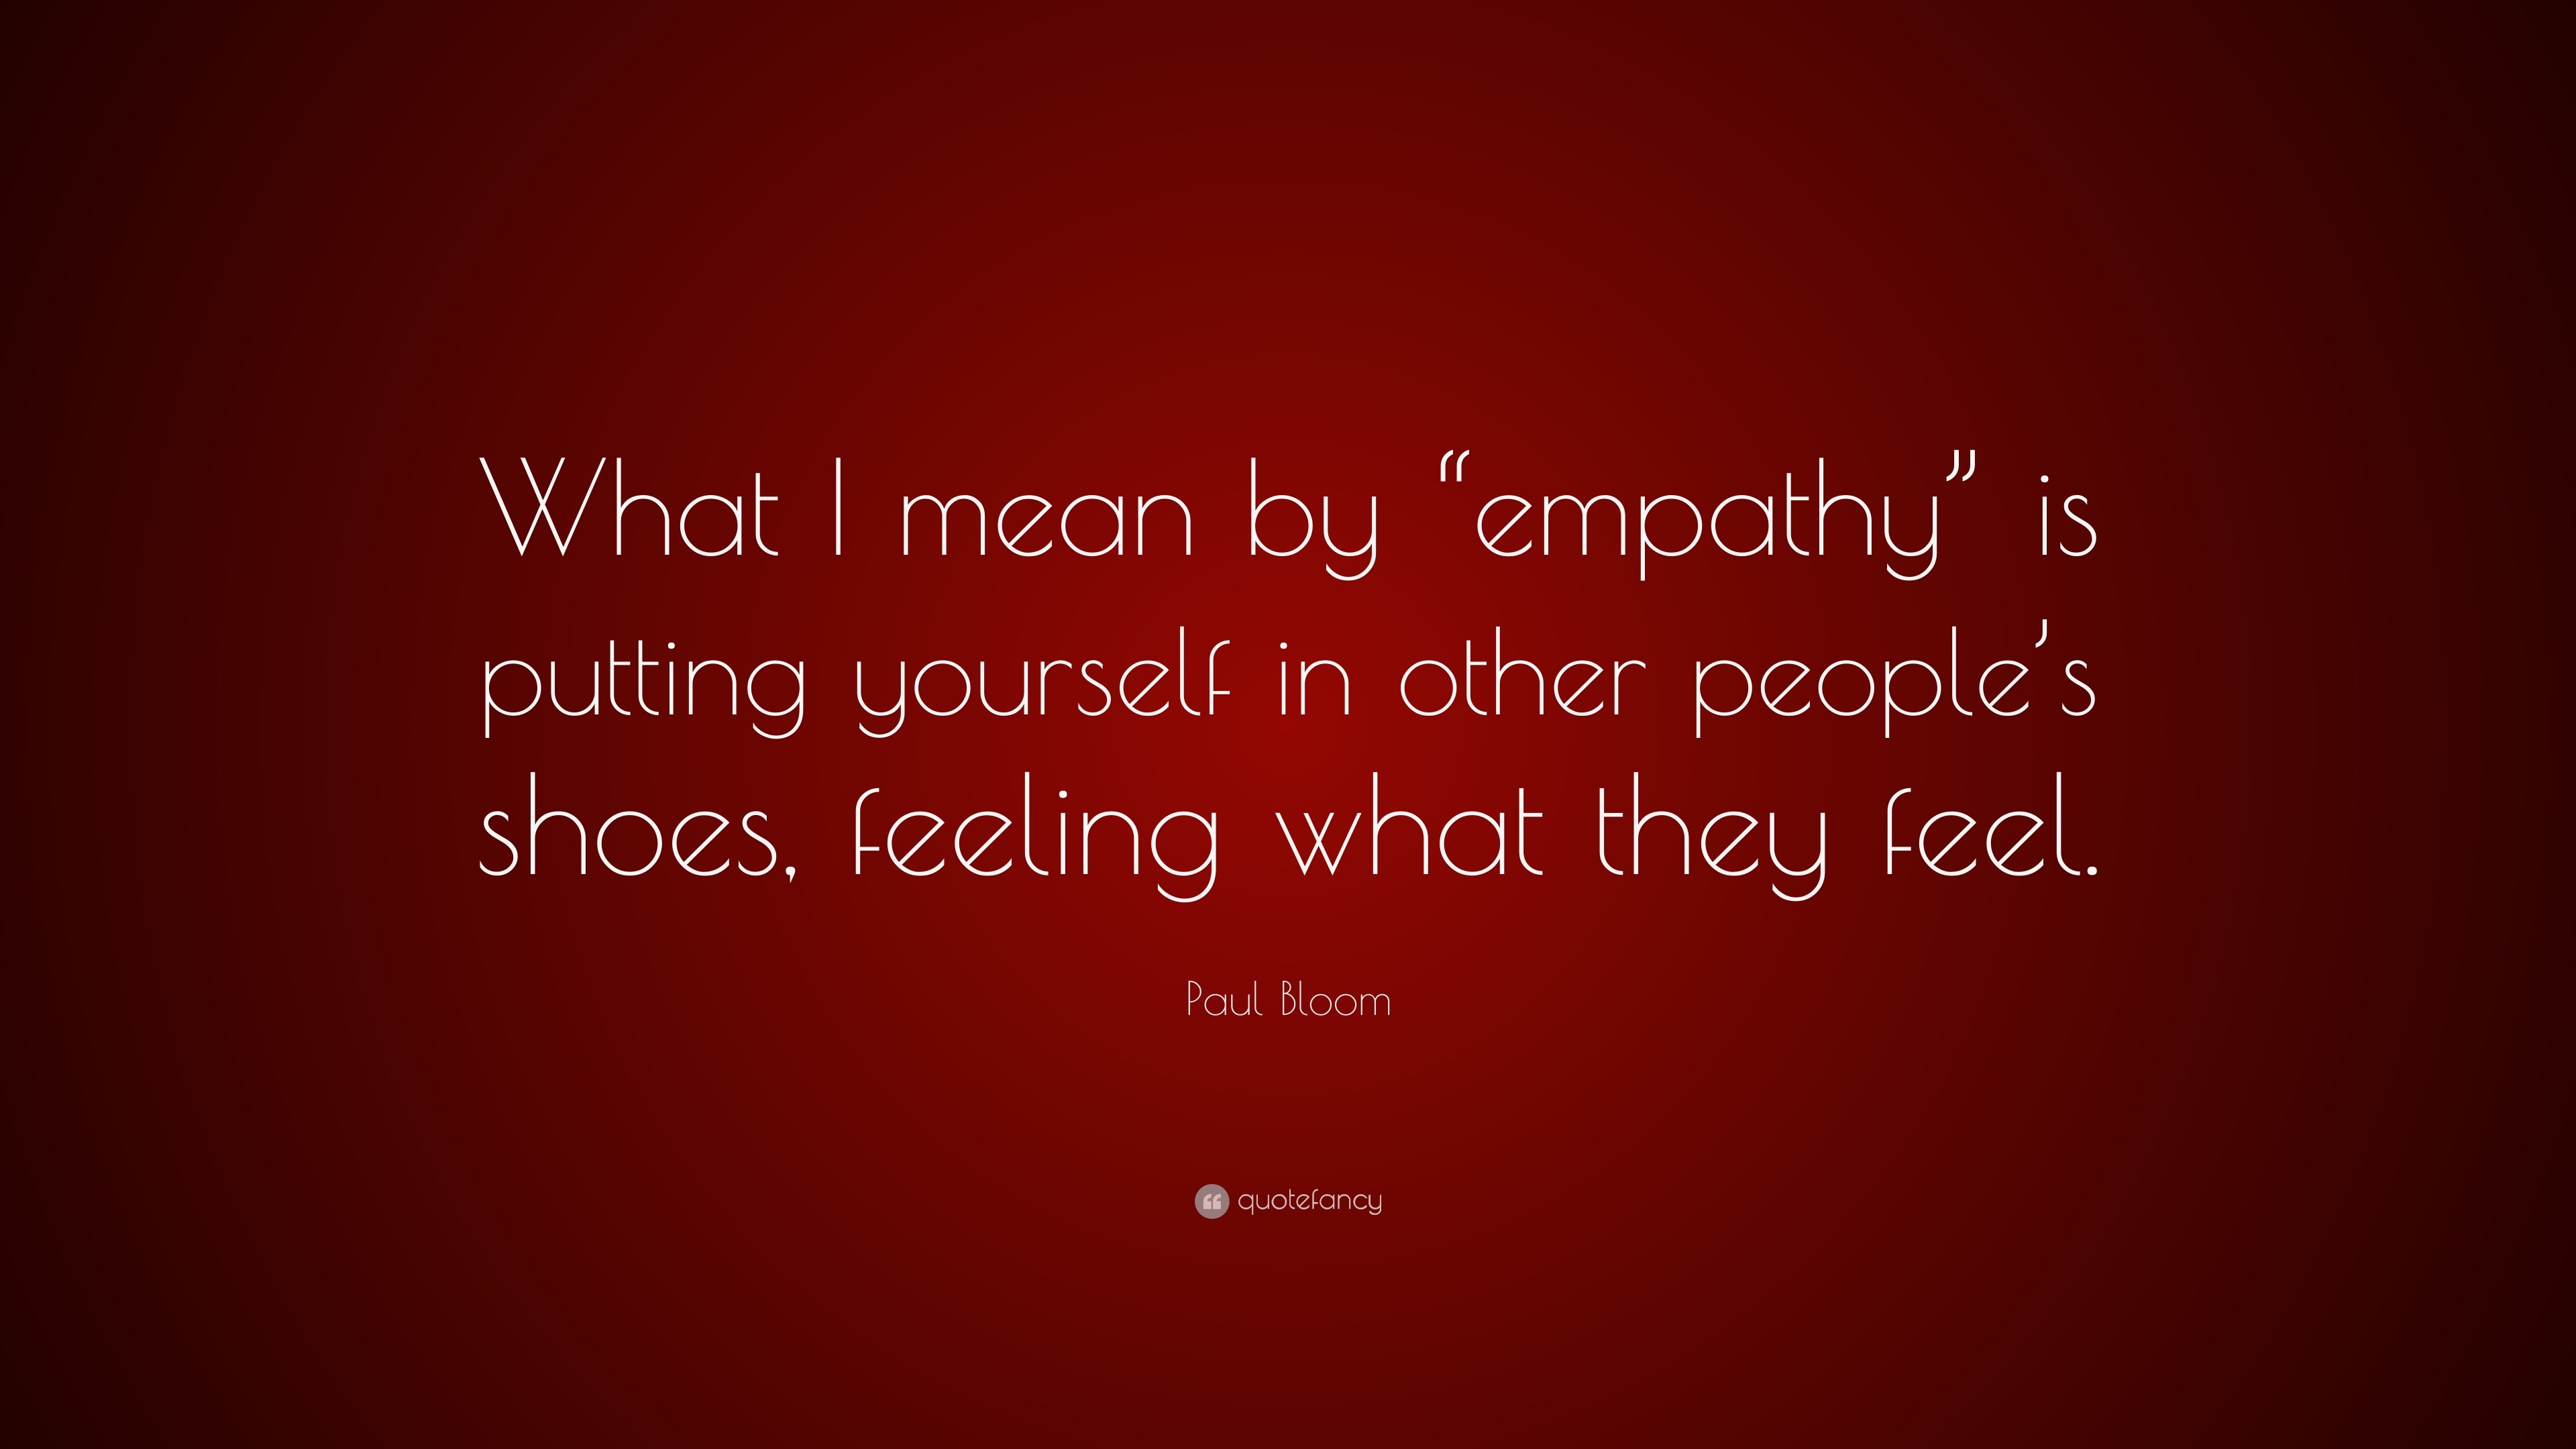 Mount Bank stationery Sage Paul Bloom Quote: “What I mean by “empathy” is putting yourself in other  people's shoes, feeling